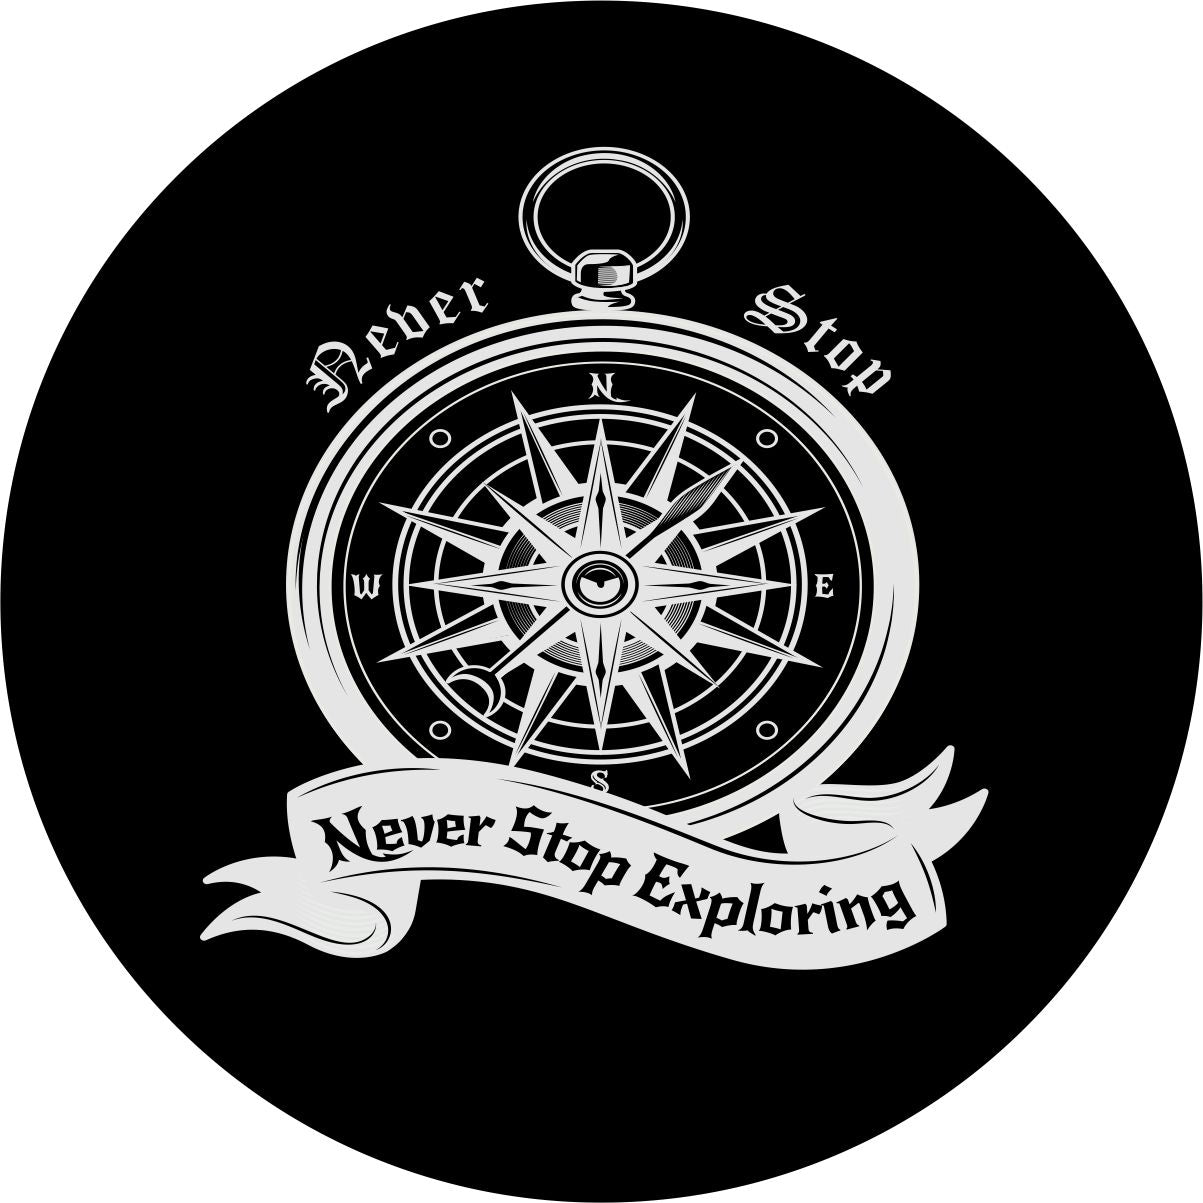 Vintage compass spare tire cover design and the saying never stop exploring. Graphic design creative spare tire cover.